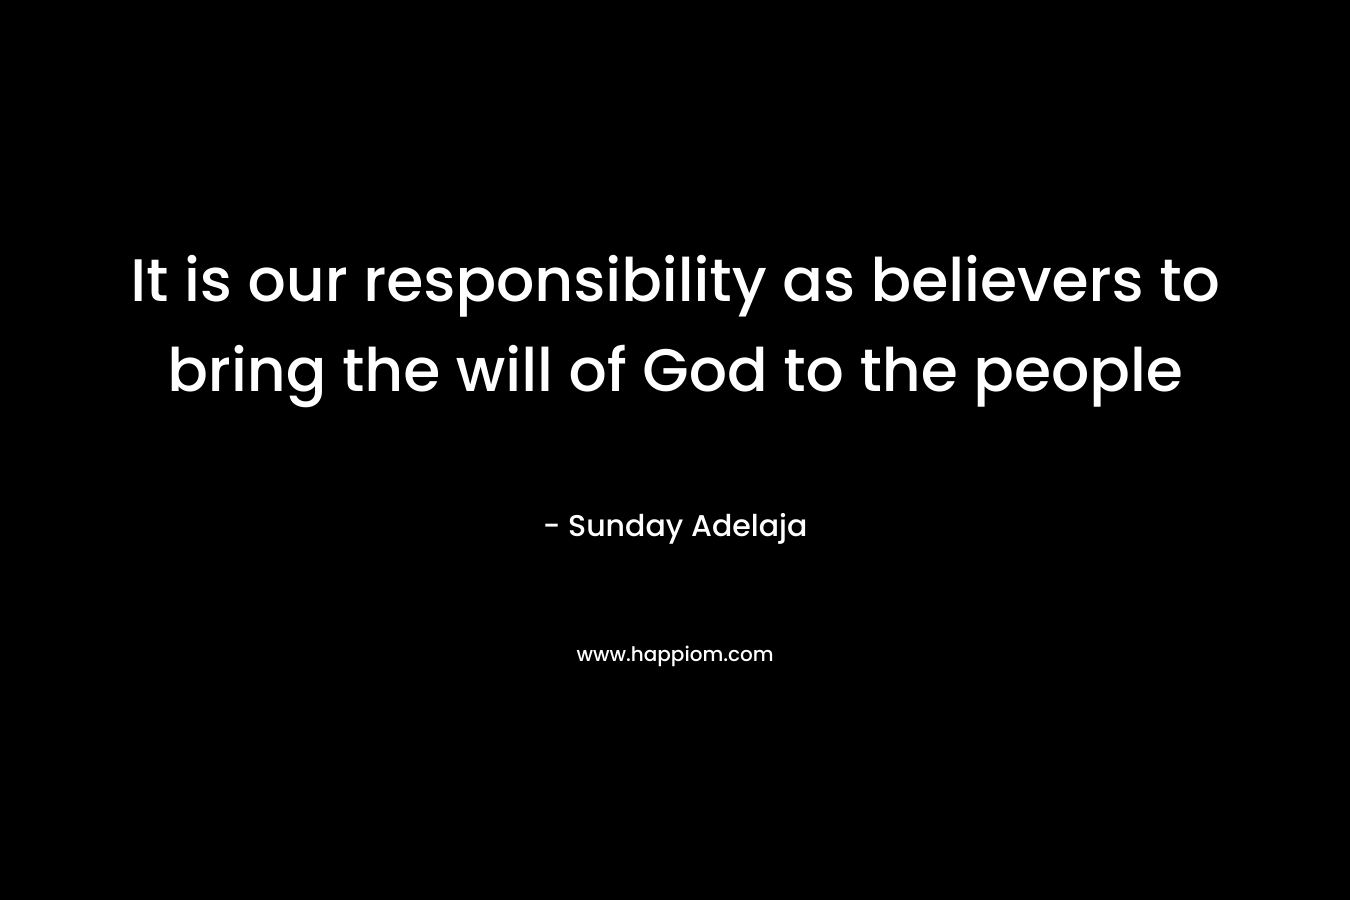 It is our responsibility as believers to bring the will of God to the people